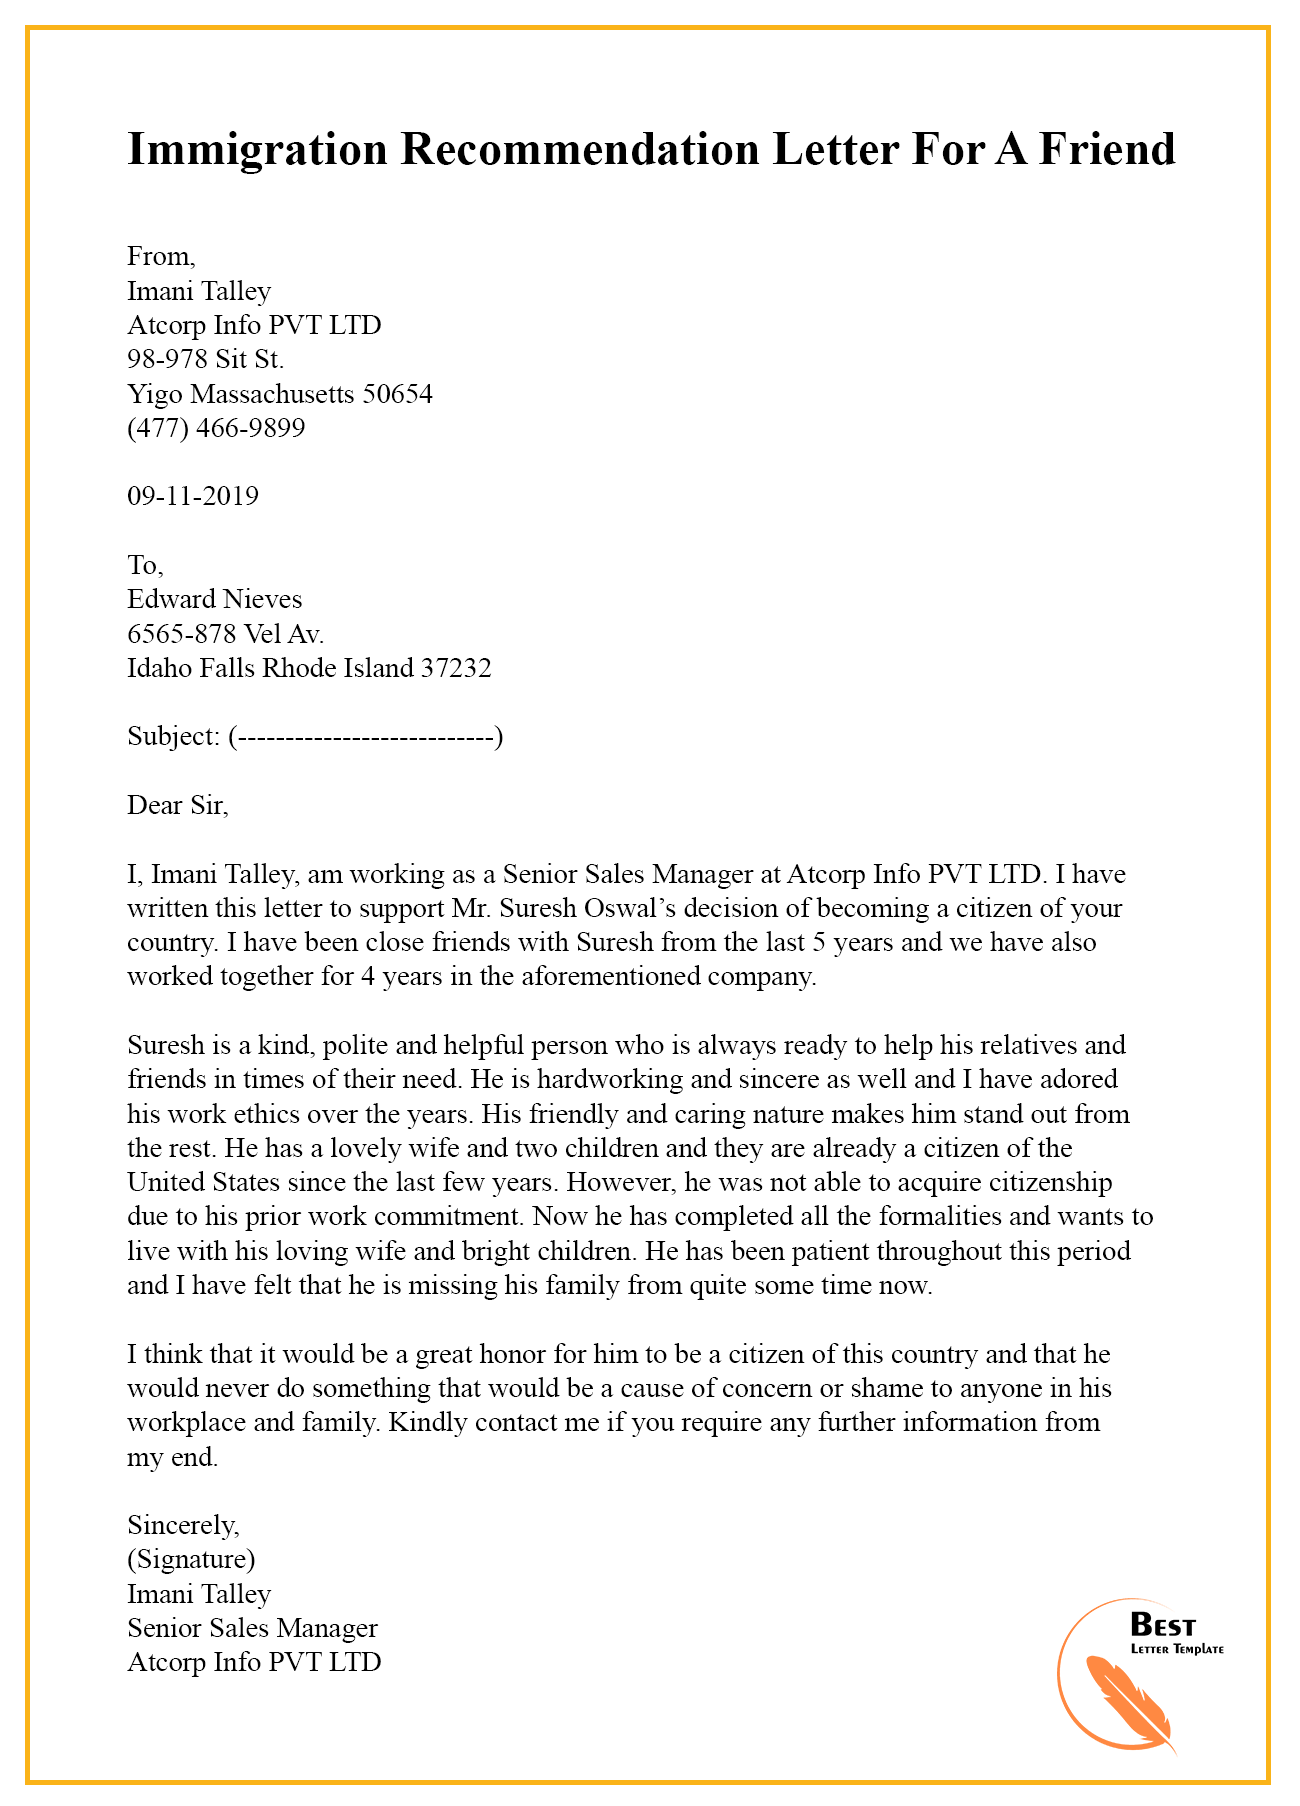 Recommendation Letter for a Friend – Format, Sample & Example